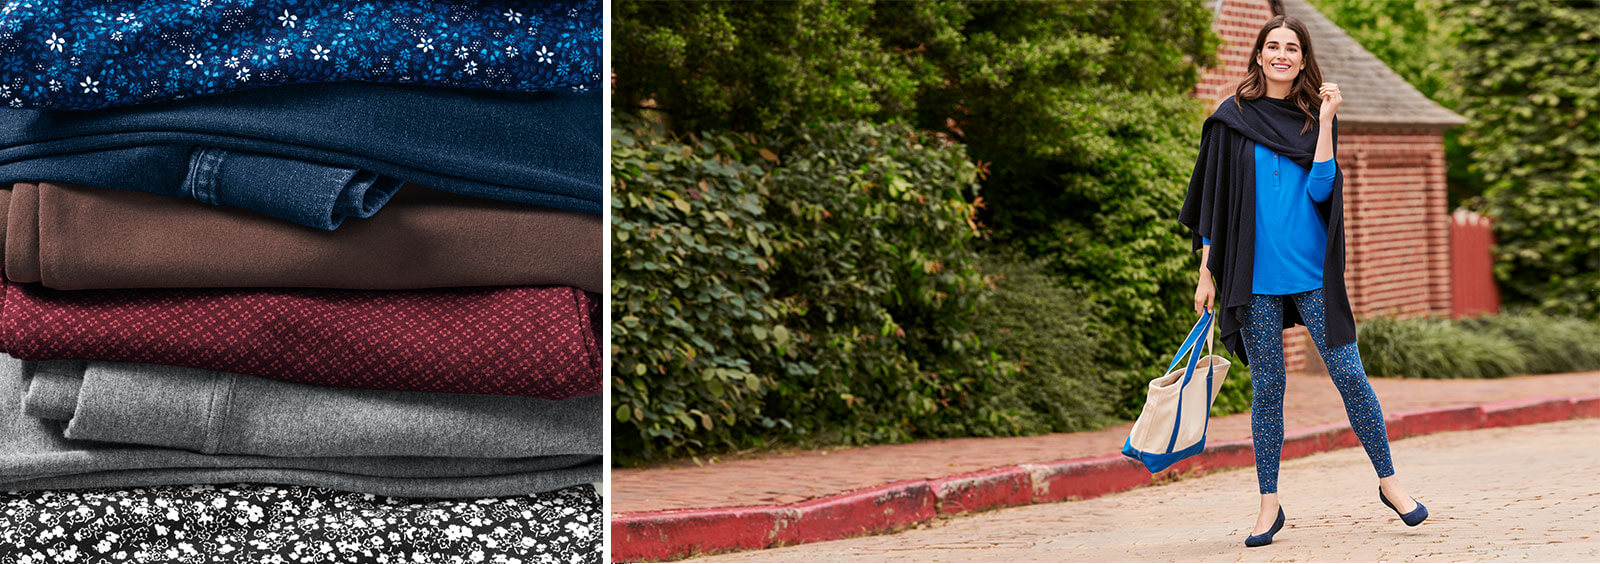 Workout Leggings vs. Everyday Leggings: What’s the Difference?